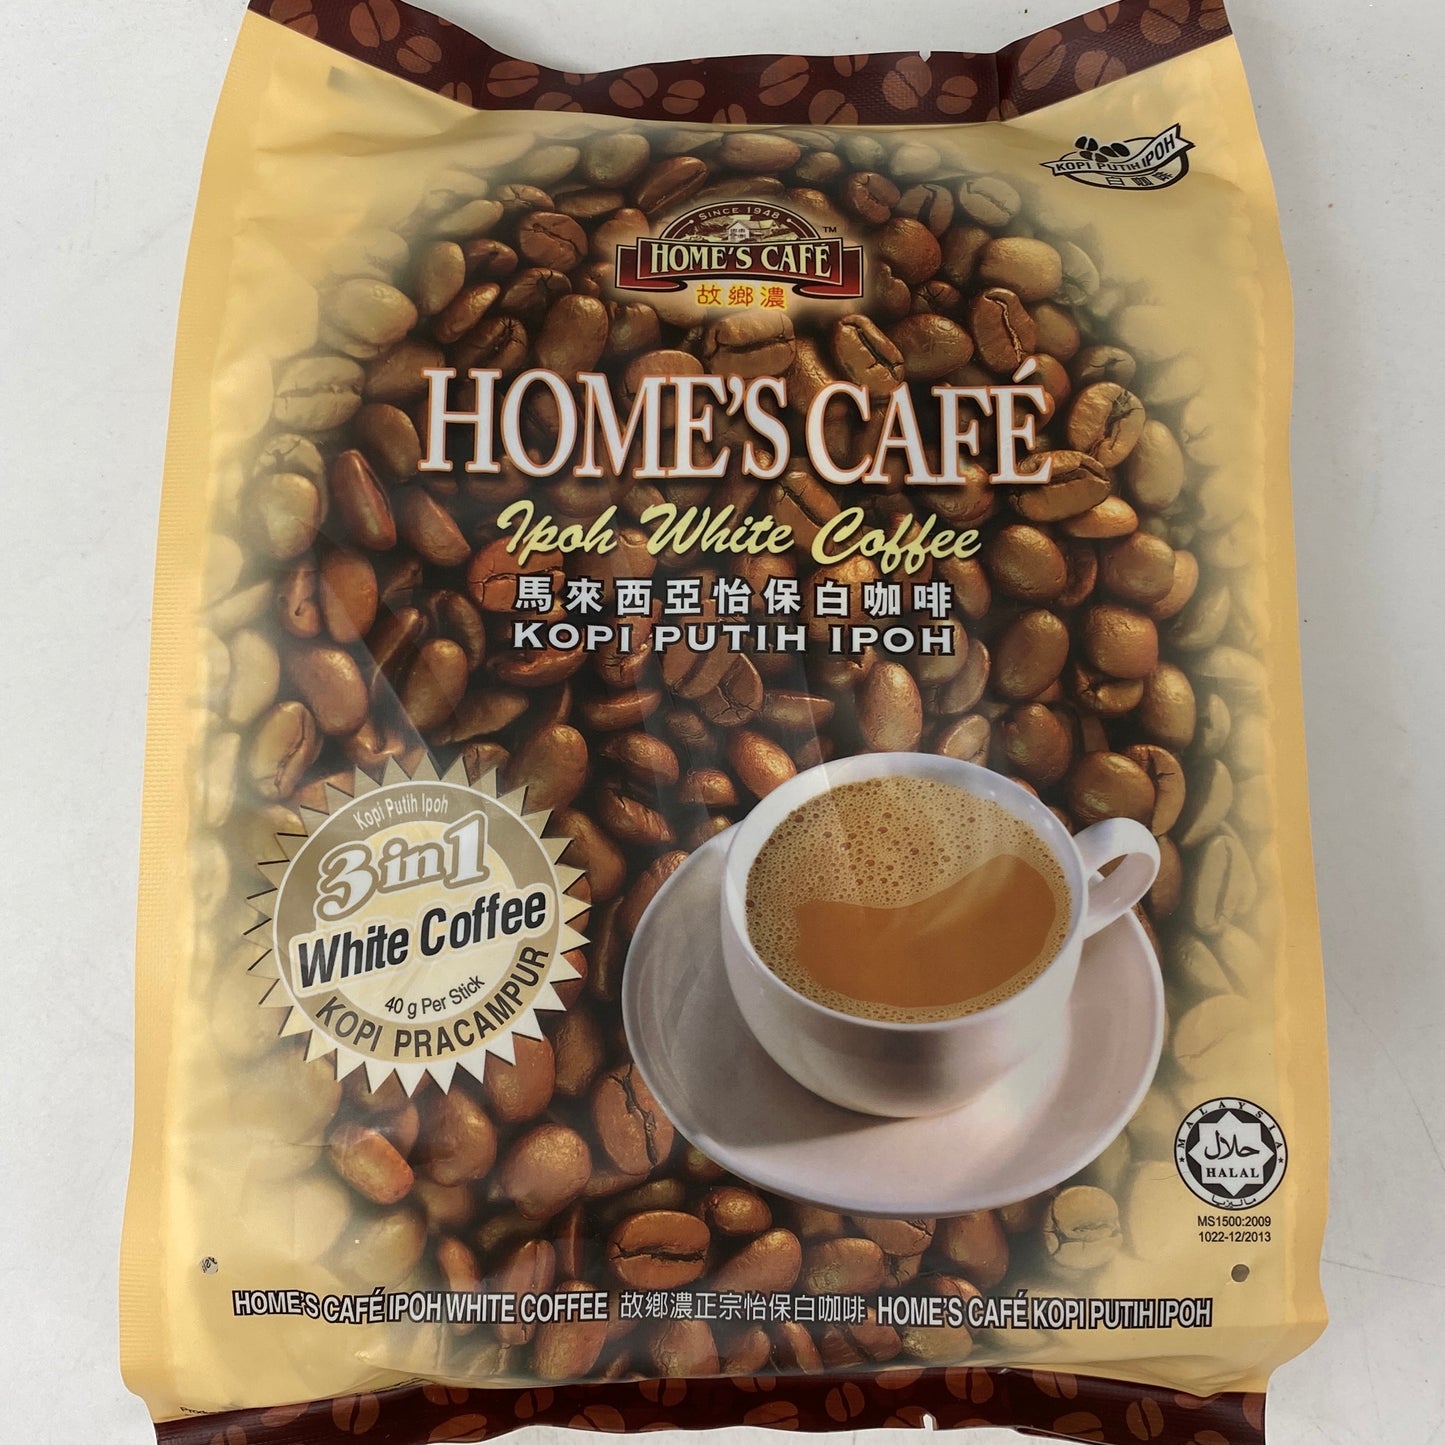 I006 Home's Cafe Brand - Malaysia Ipoh White Coffee 3in1 15x40g - 24 bags / 1 CTN